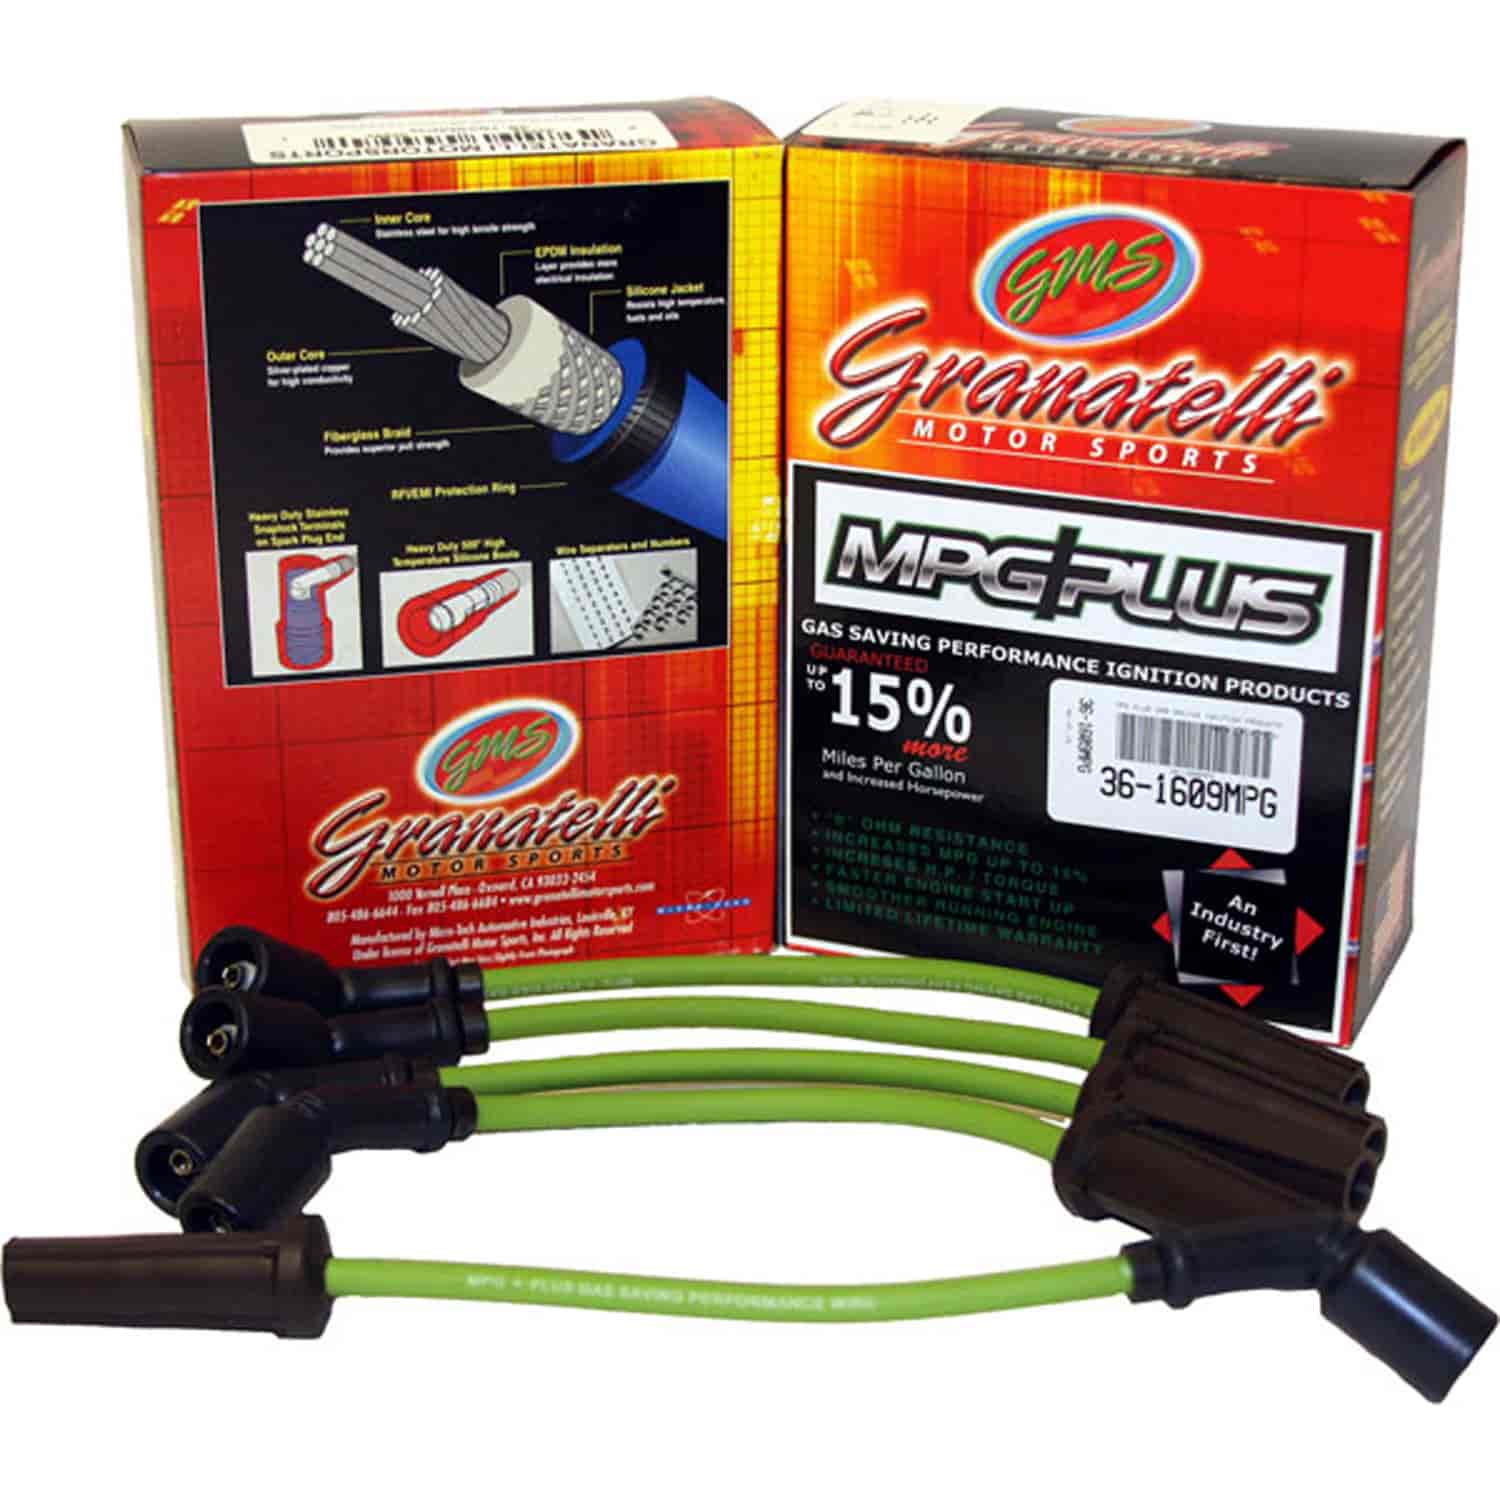 MPG Wires VOLVO 240 260 SERIES 4CYL 2.3L 85-87